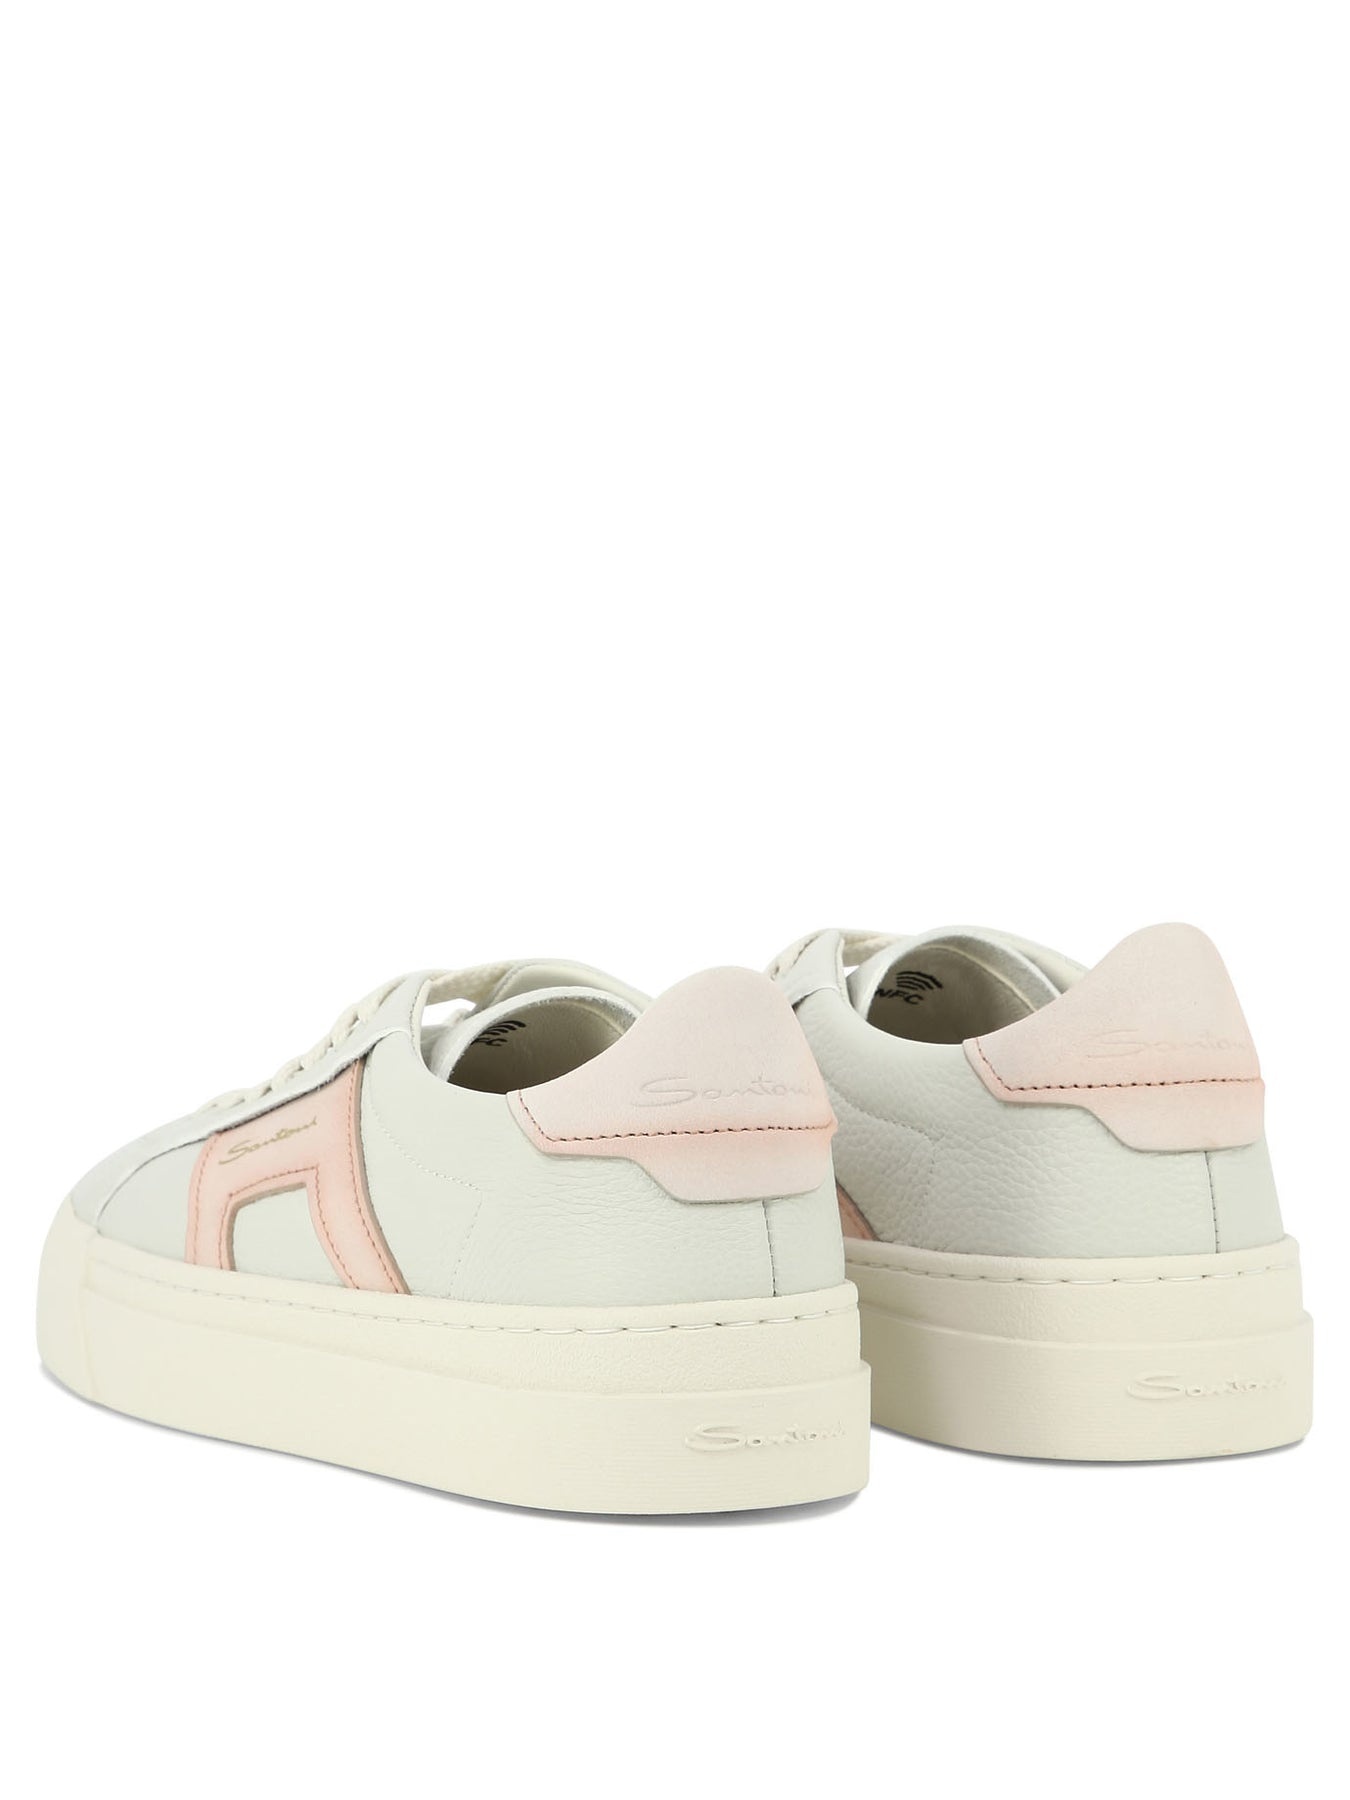 Double Buckle Sneakers & Slip-On White - 4